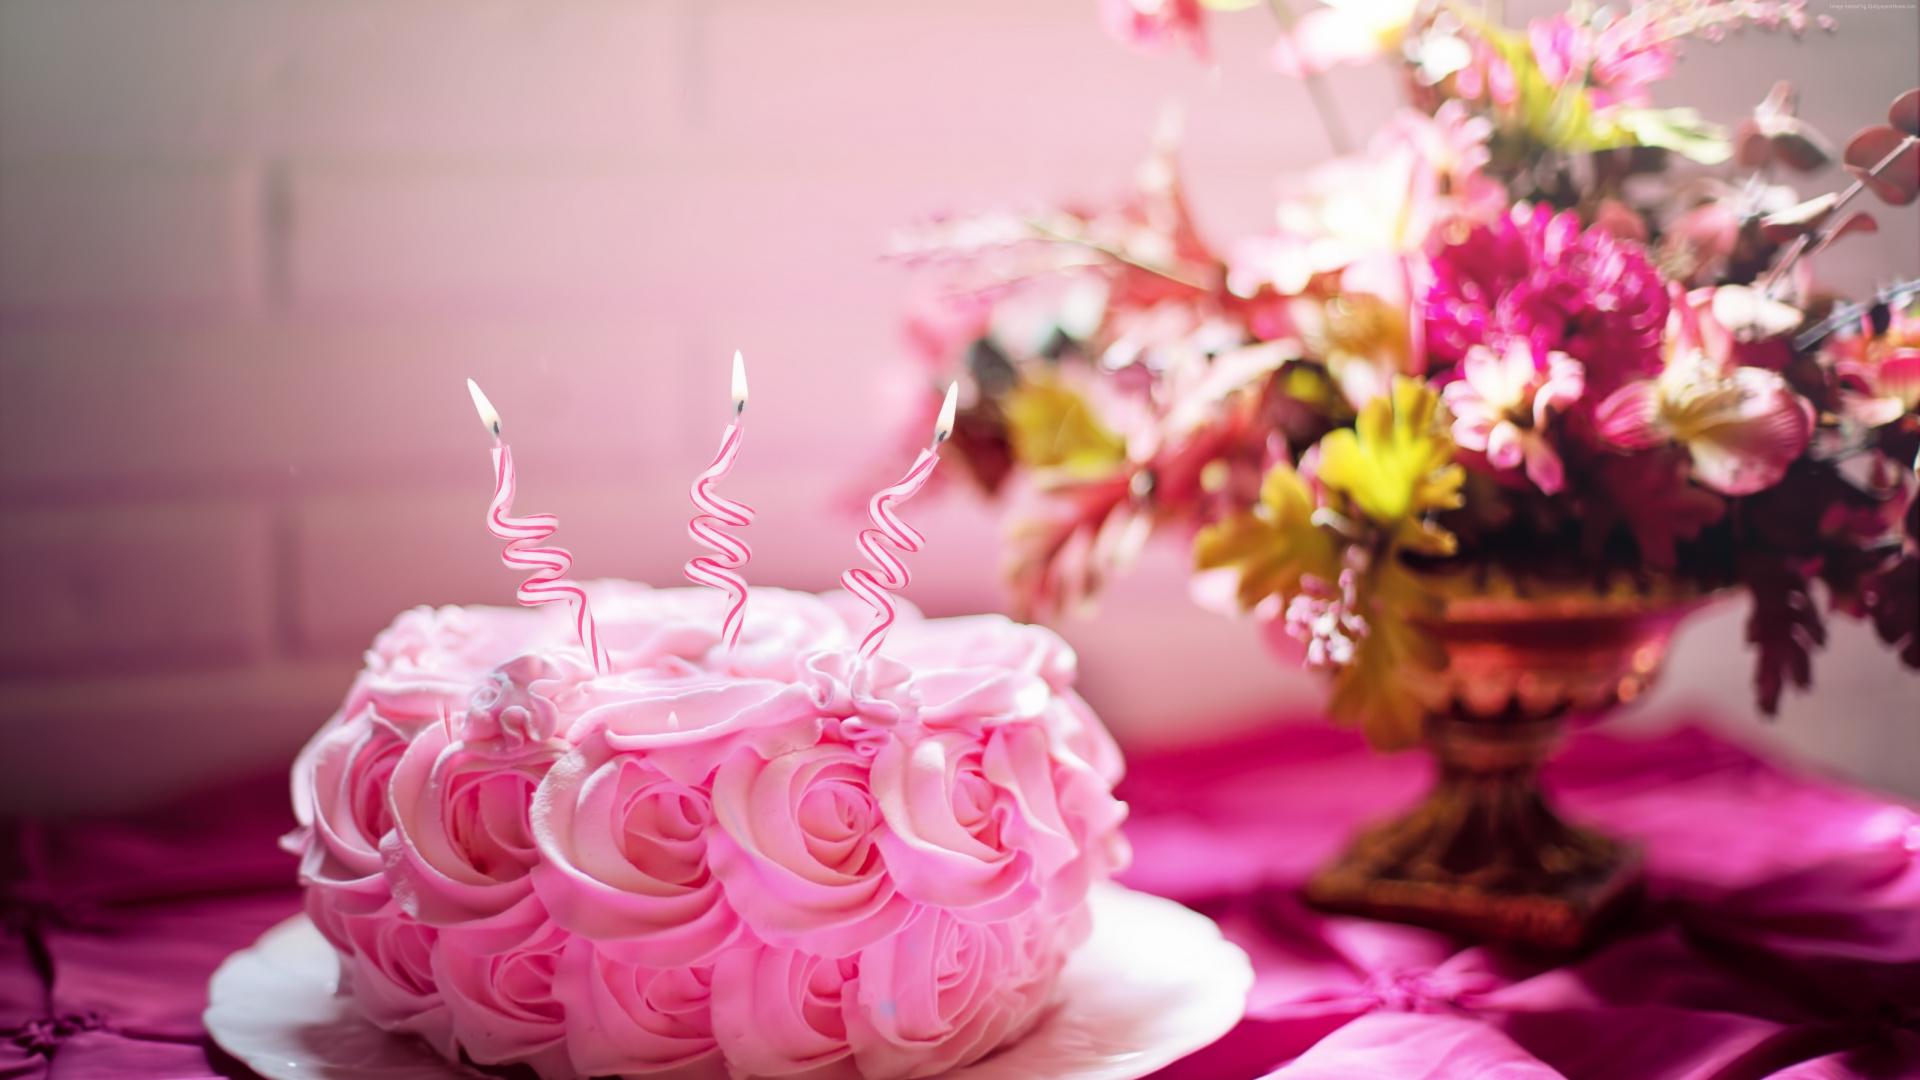 Icing, Birthday Cake, Cake Decorating, Pink, Sweetness. Wallpaper in 1920x1080 Resolution